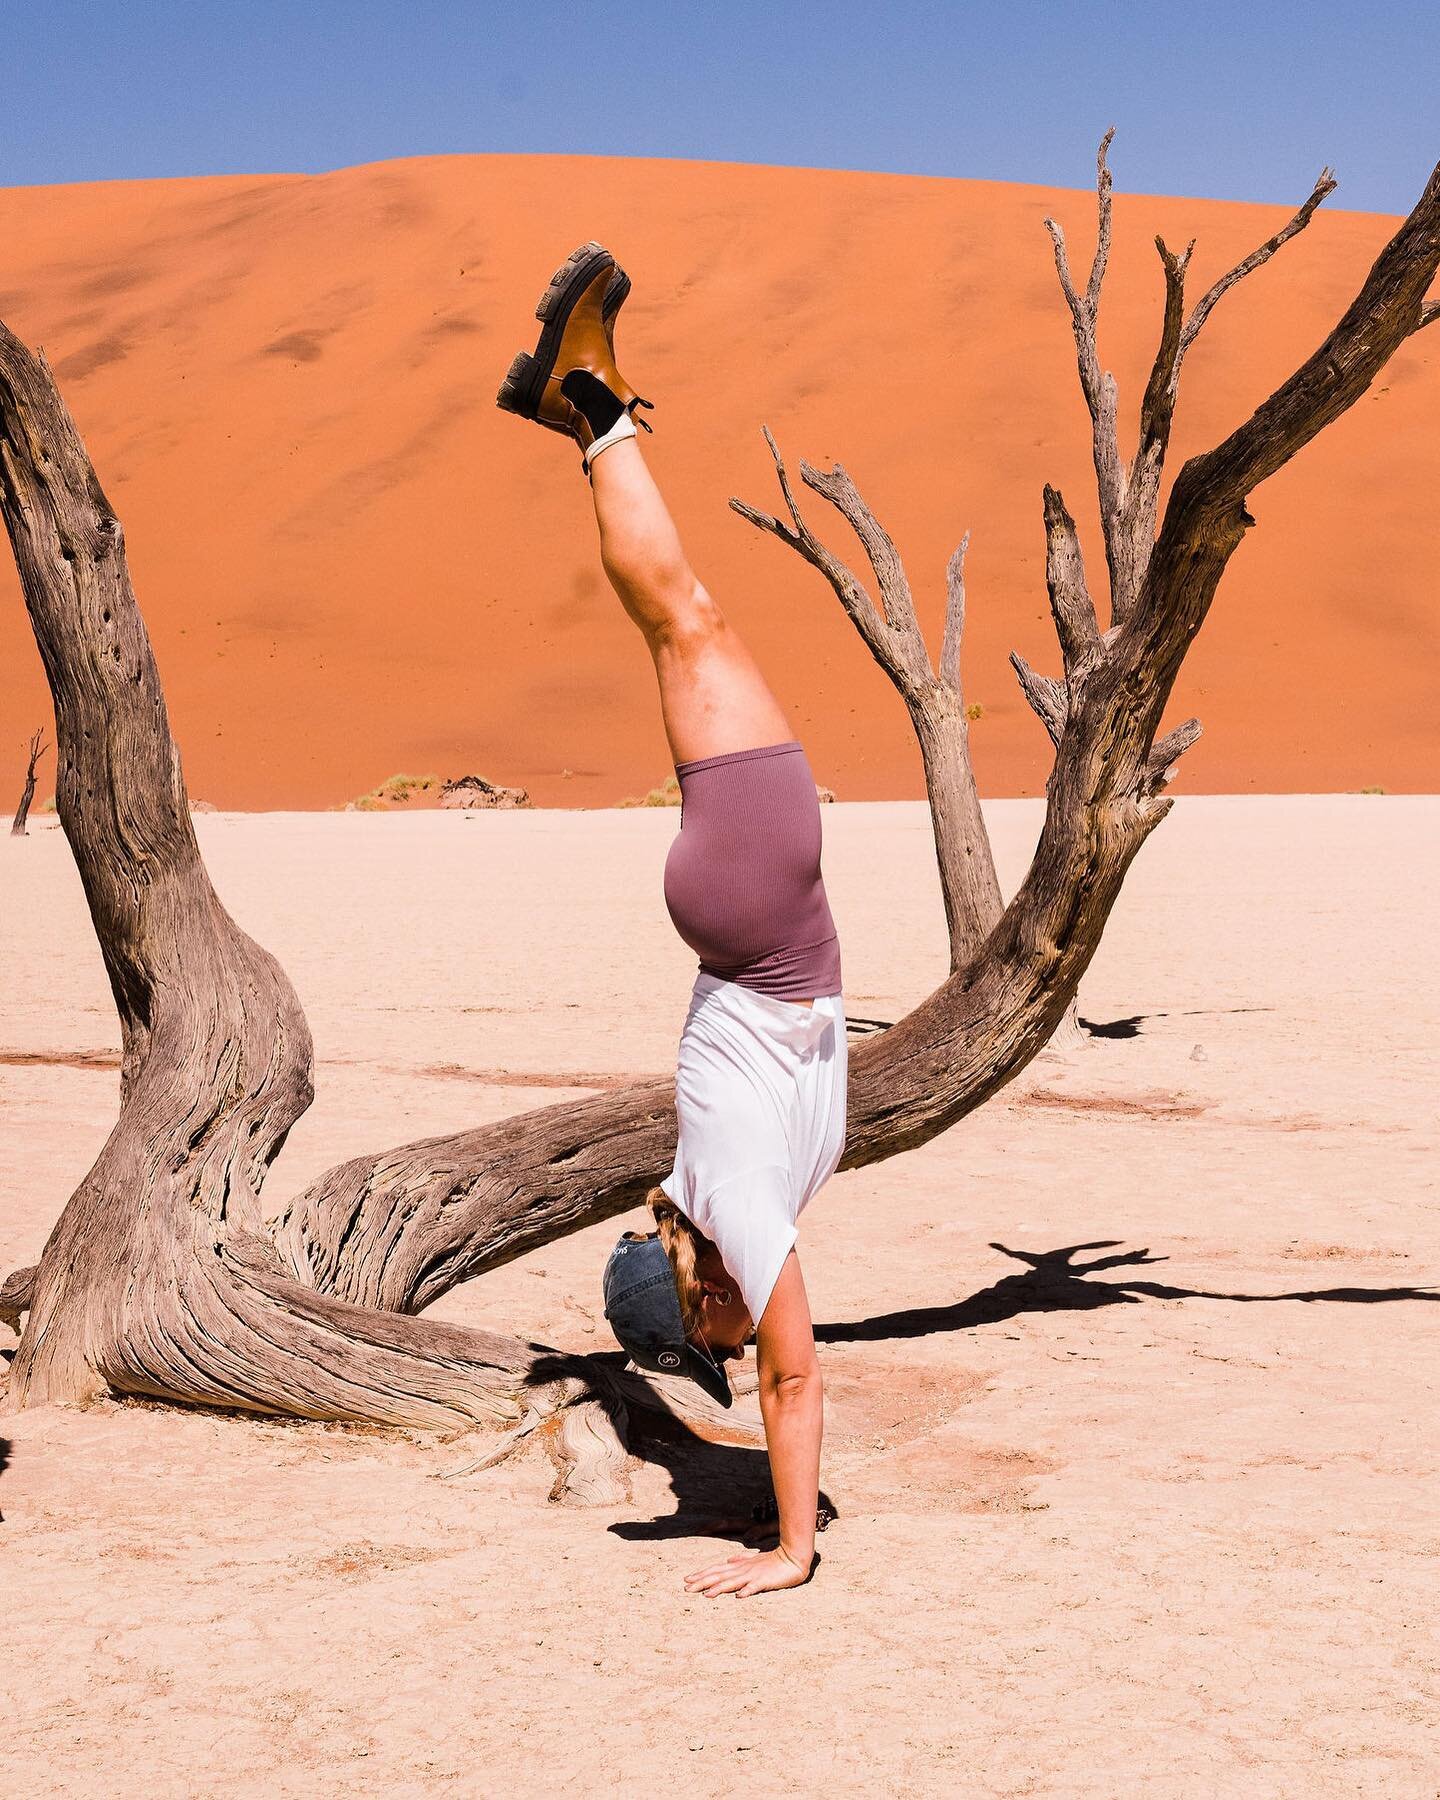 that friYAY feeling: a three part series as told post-big daddy (nooooo that&rsquo;s really what the dune is called!!) hike down to sossusvlei
🤸🏼&zwj;♂️
did you think i was done with namibia content? most certainly not. reworking the coverage over 